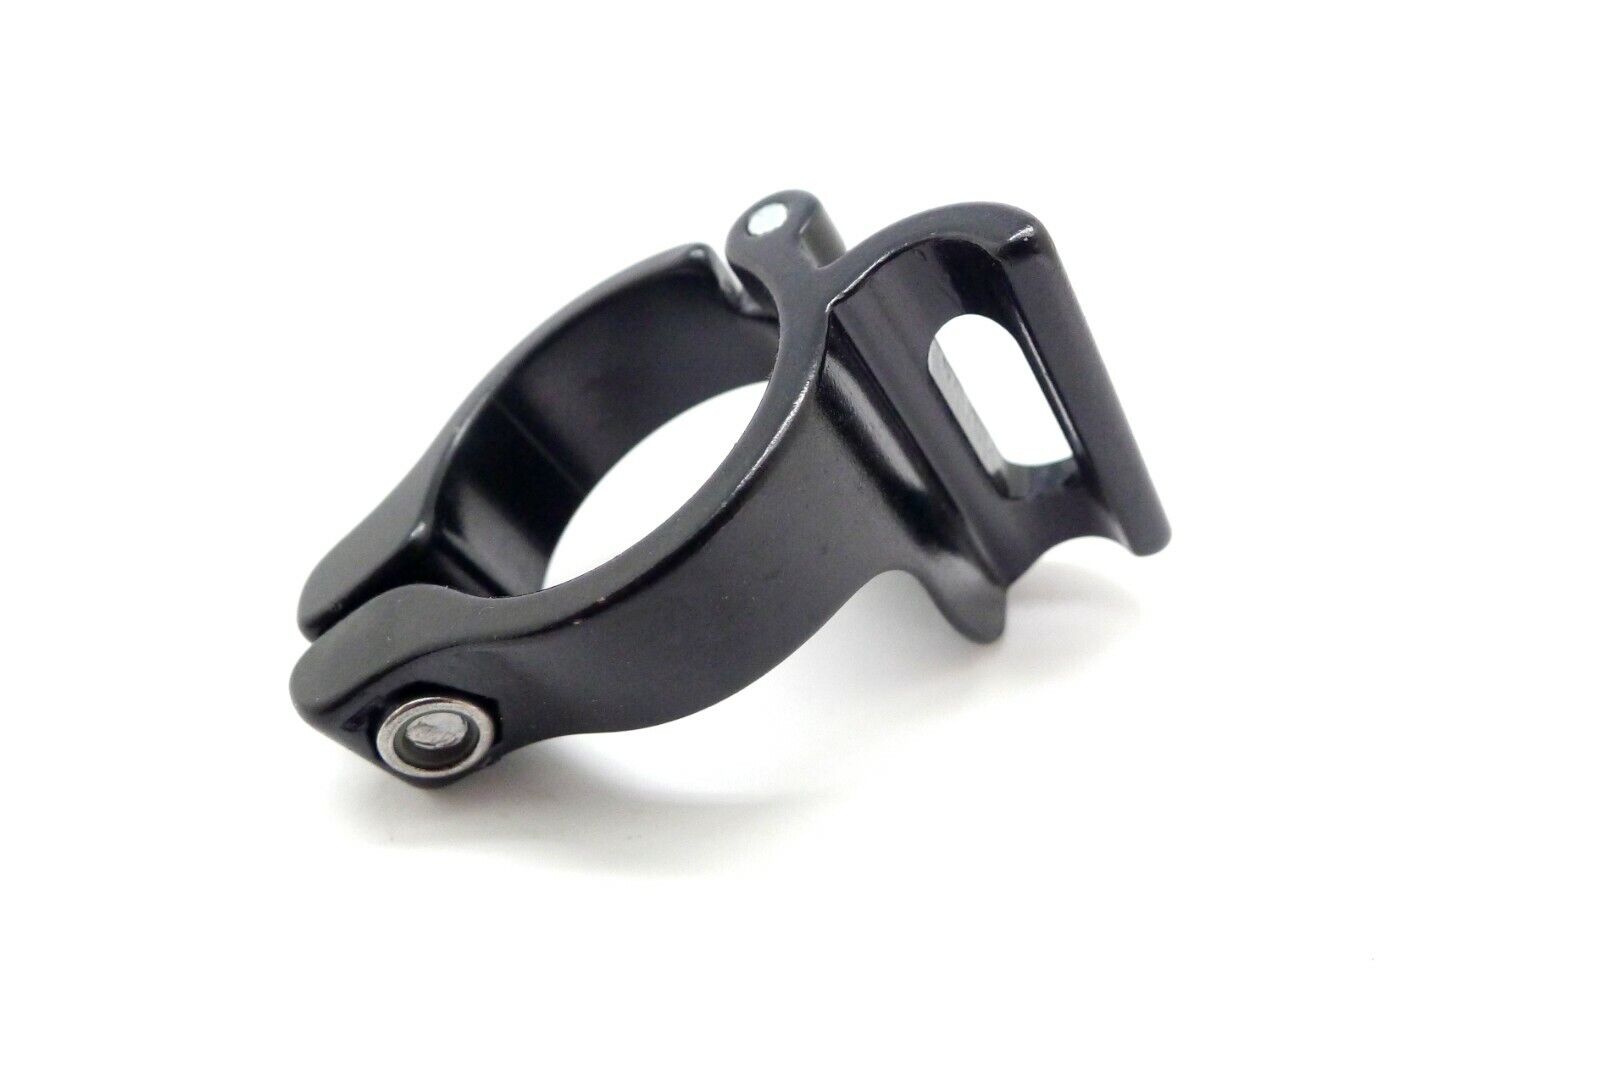 Front Derailleur Adapter Braze-On to Clamp